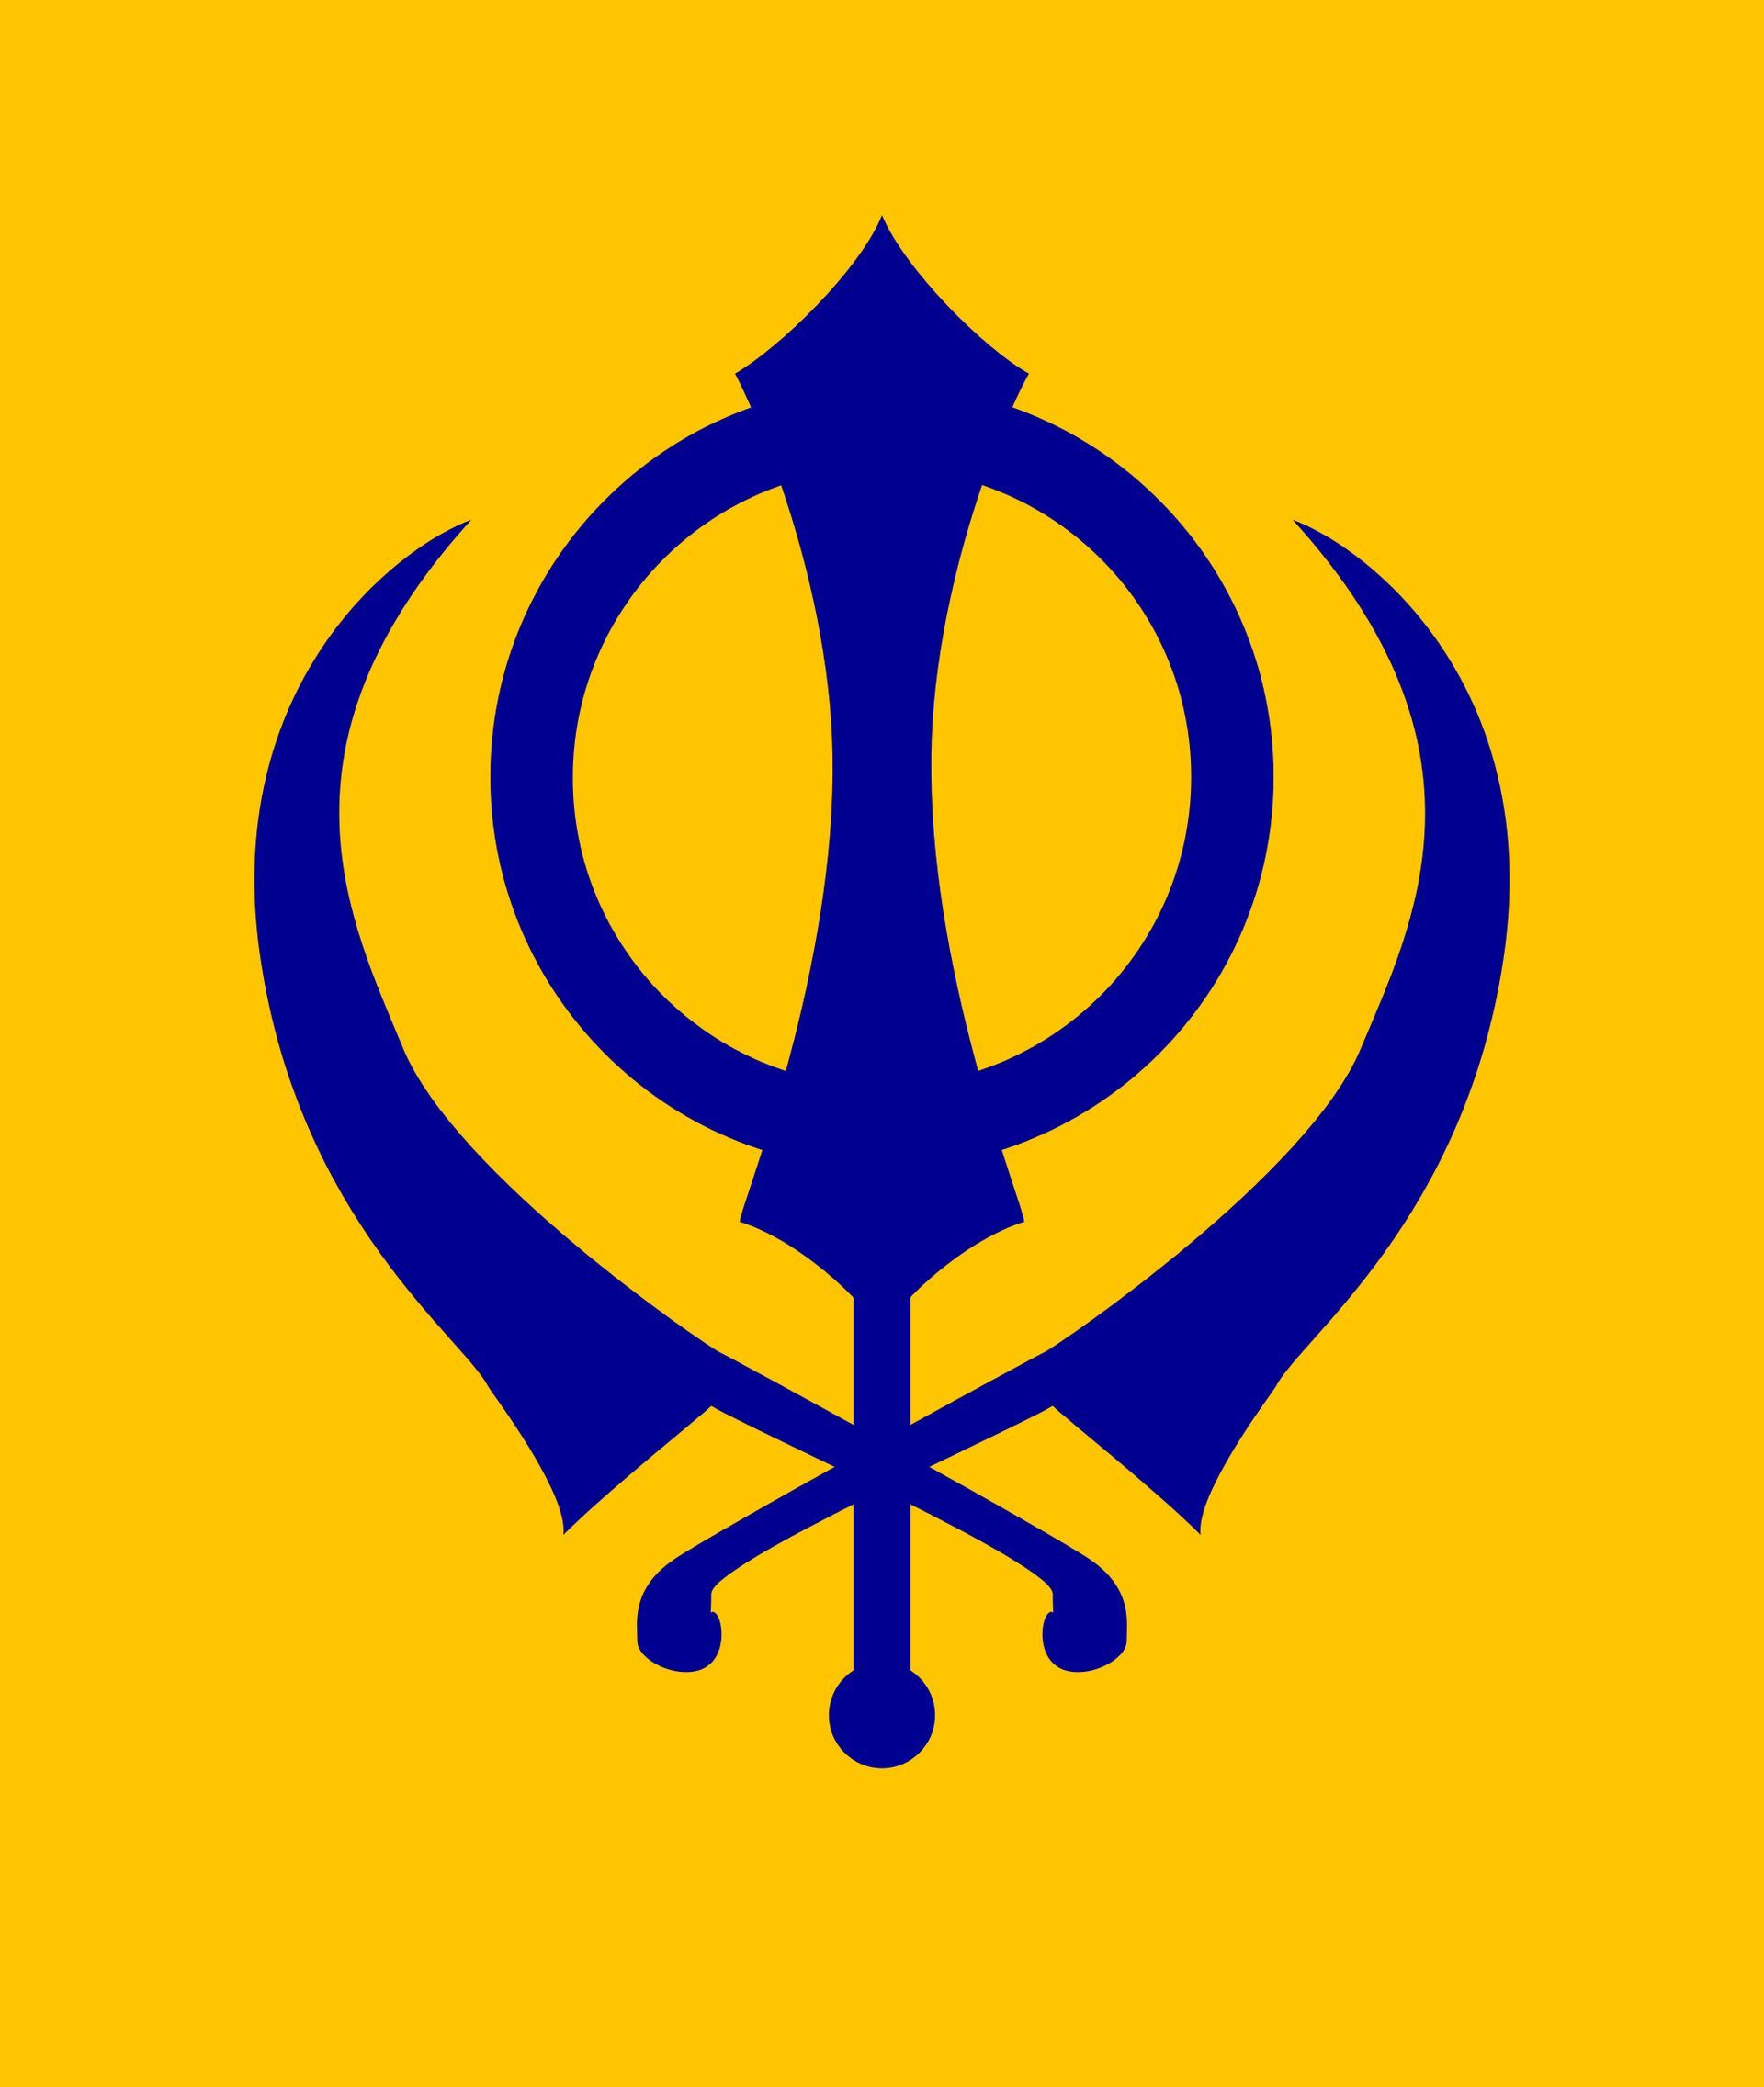 Sikhism advocates equality,social justice,service to humanity and tolerance for other religions.